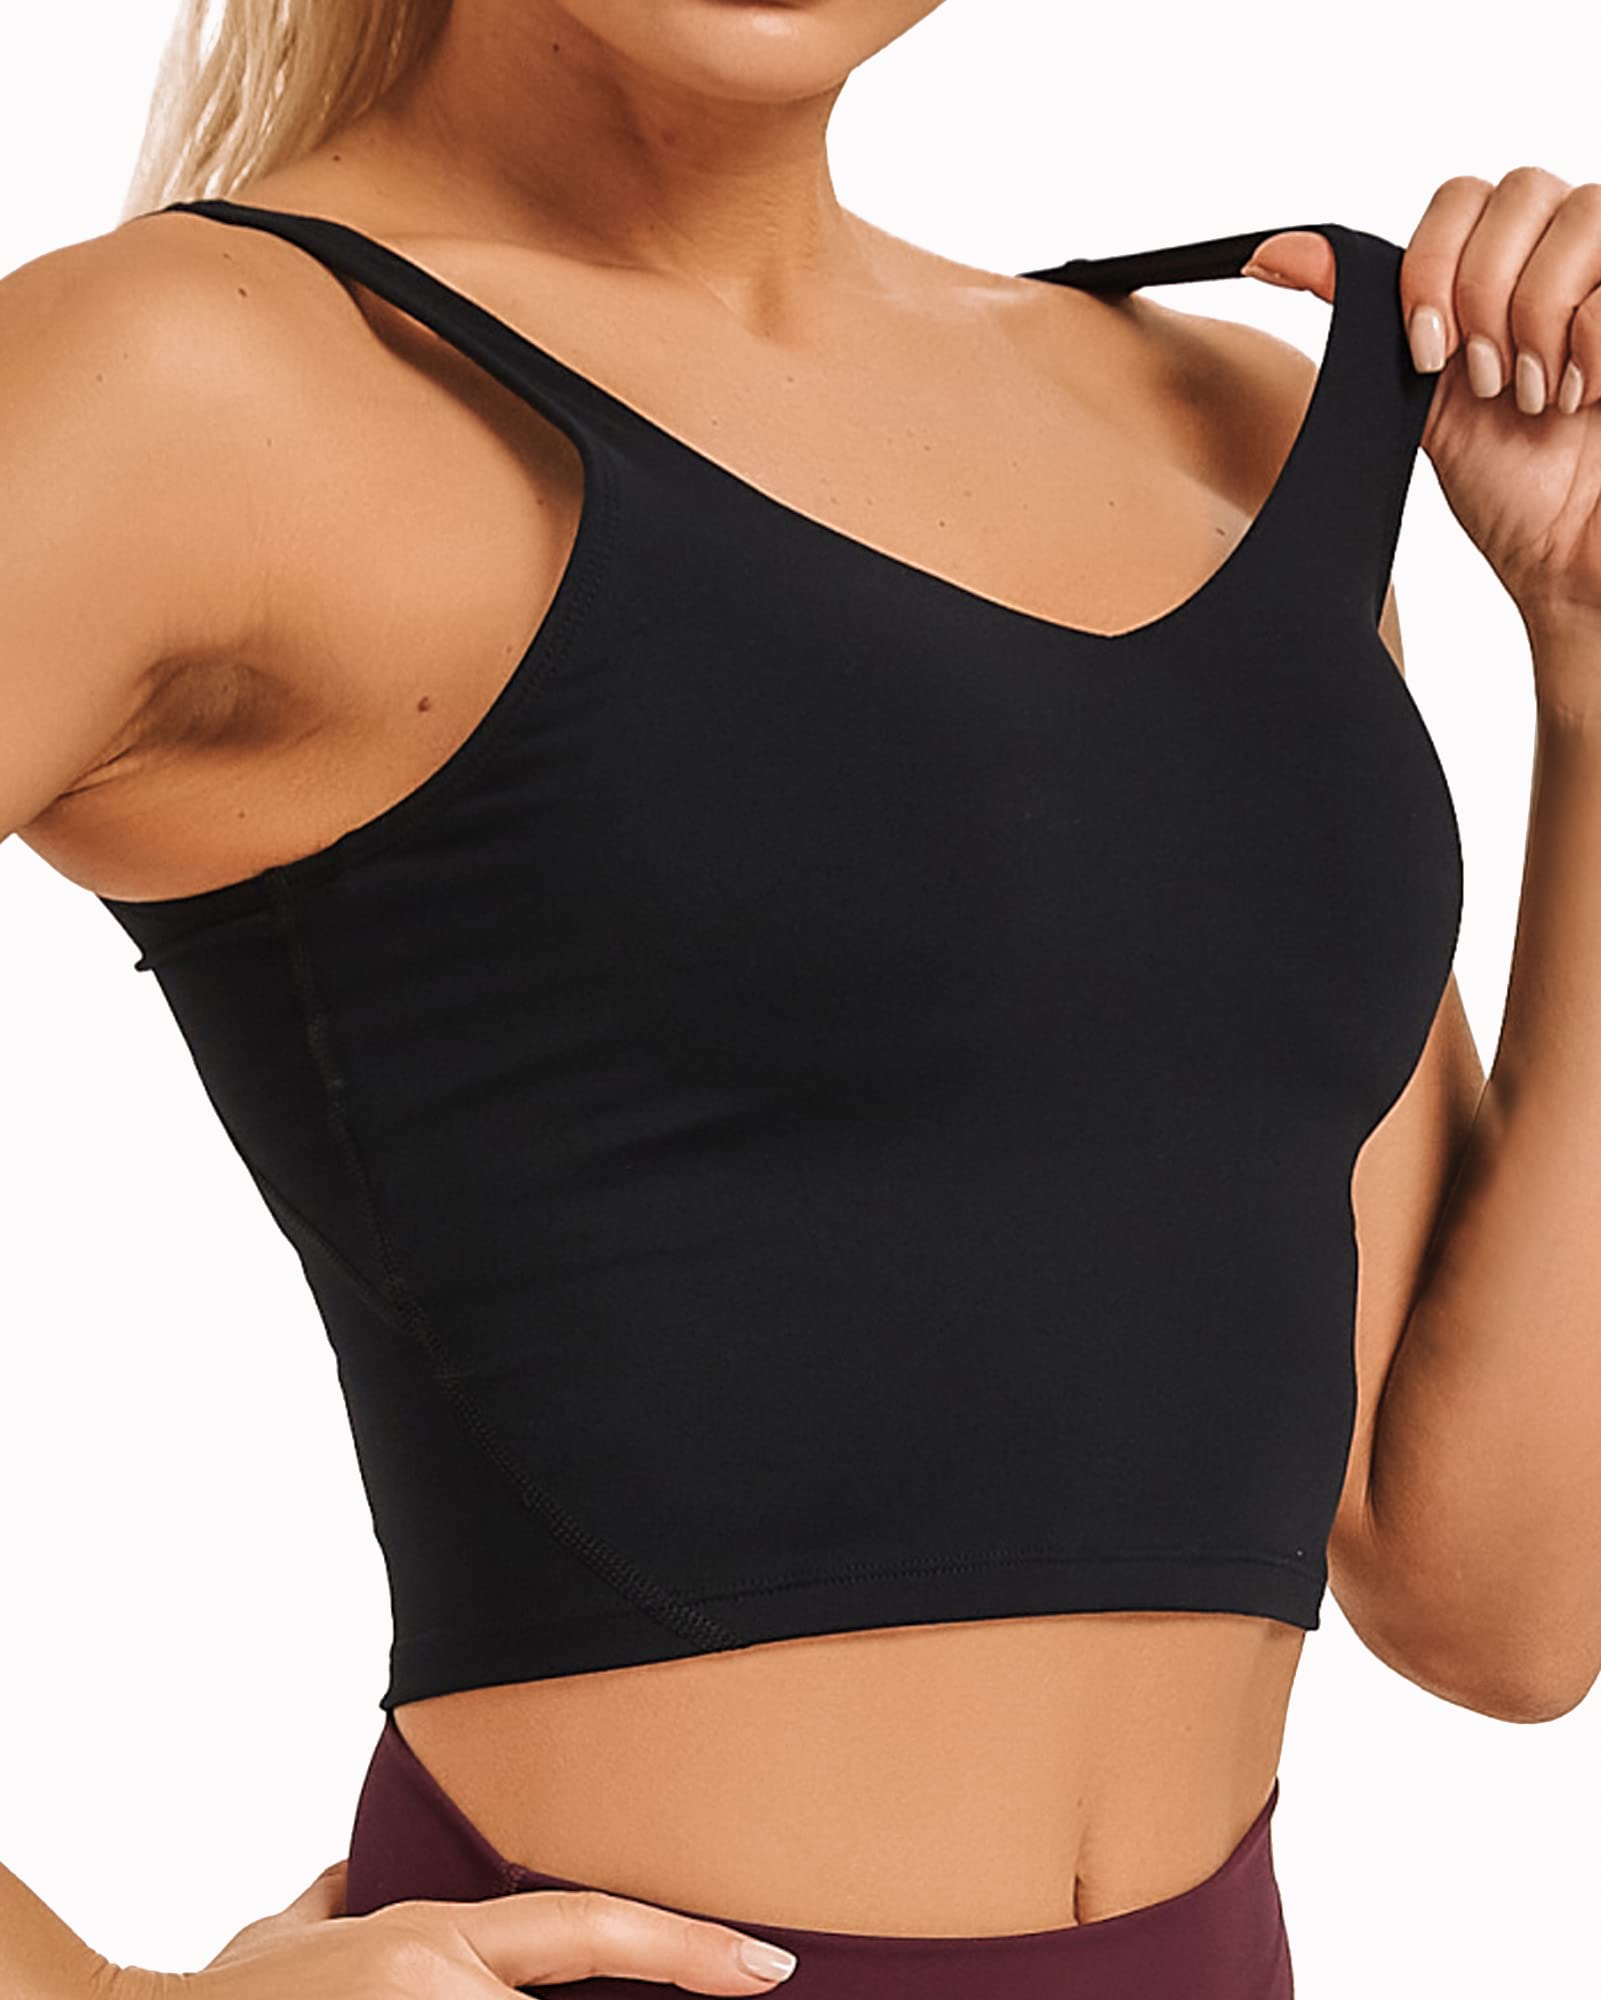 Stelle Longline Sports Bra for Women Wirefree Padded Yoga Bras Tank Tops Fitness Workout Running Top